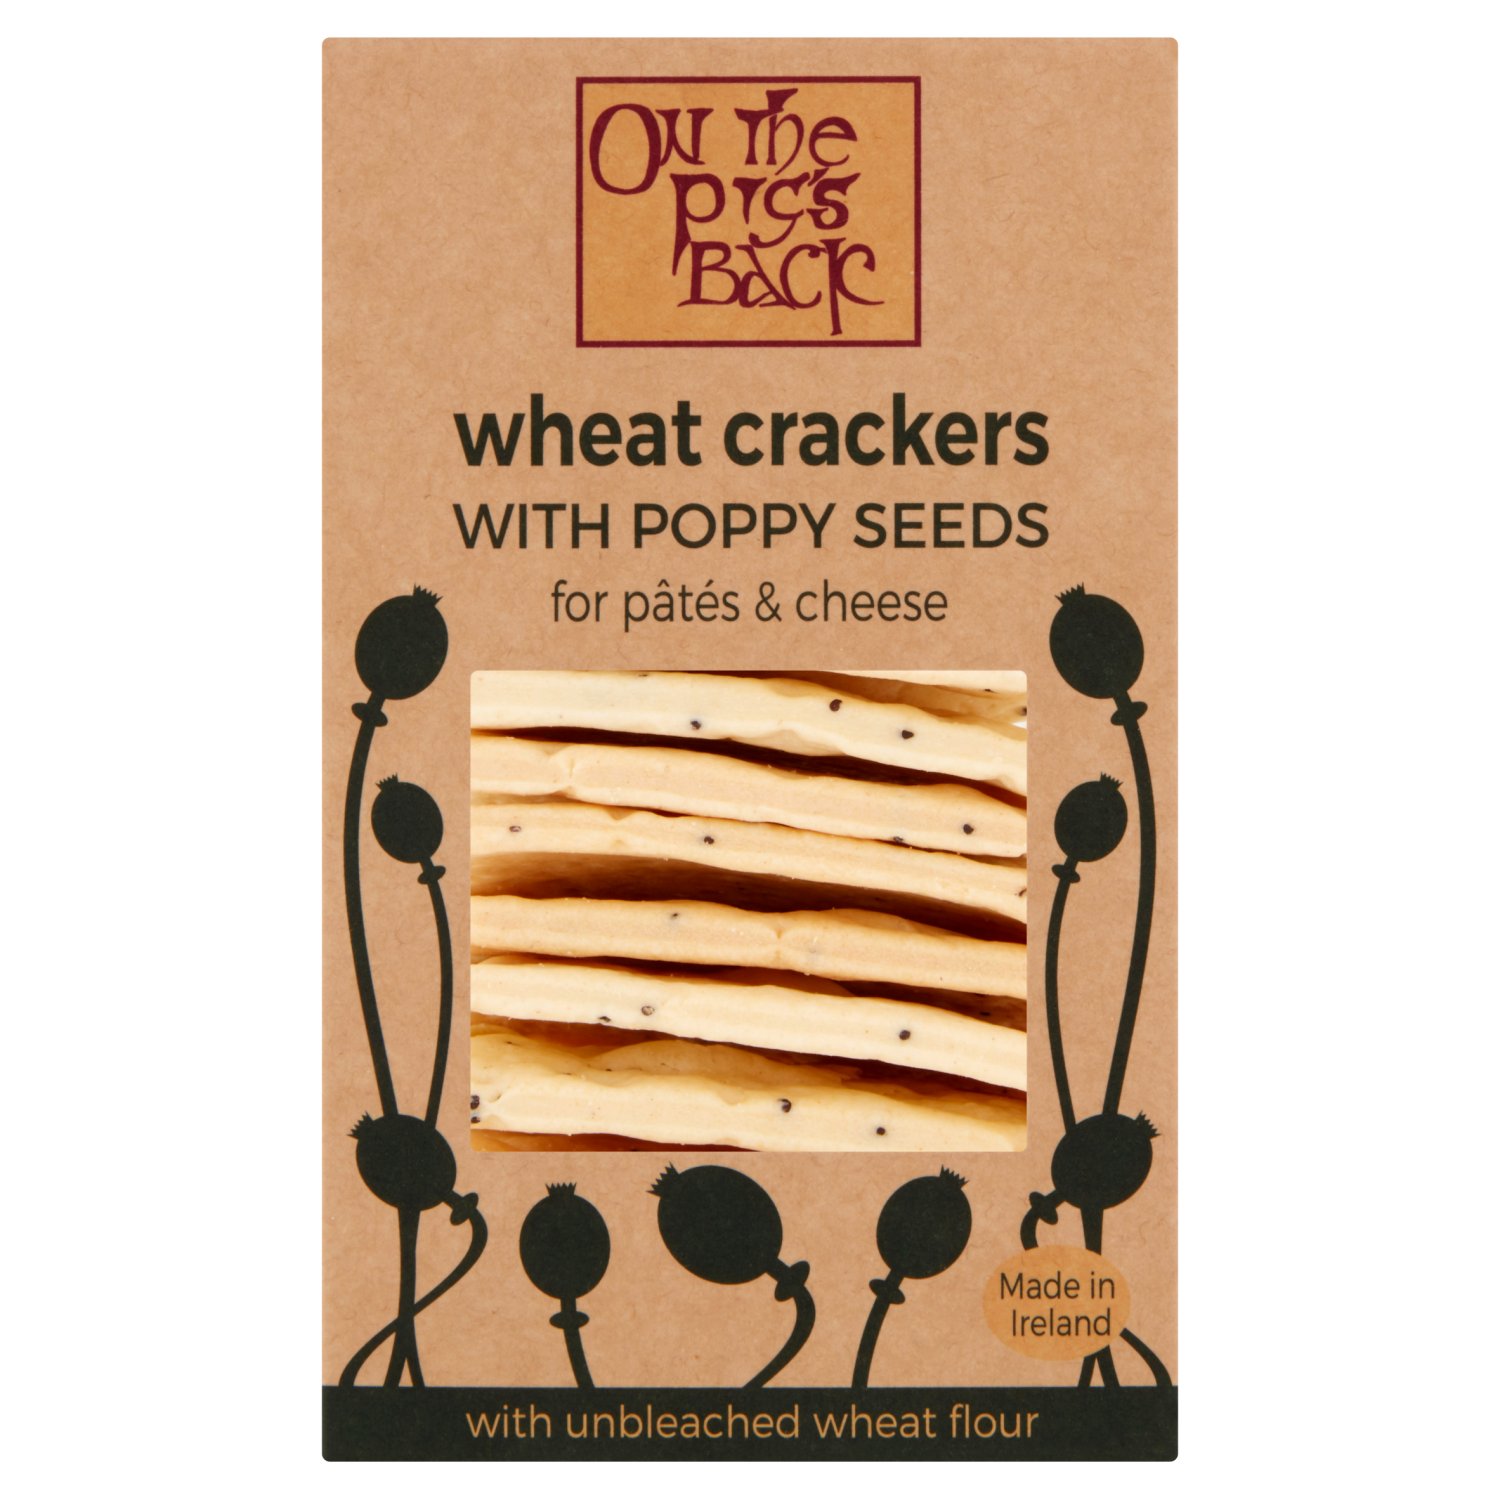 On The Pigs Back Wheat Crackers with Poppy Seeds (140 g)